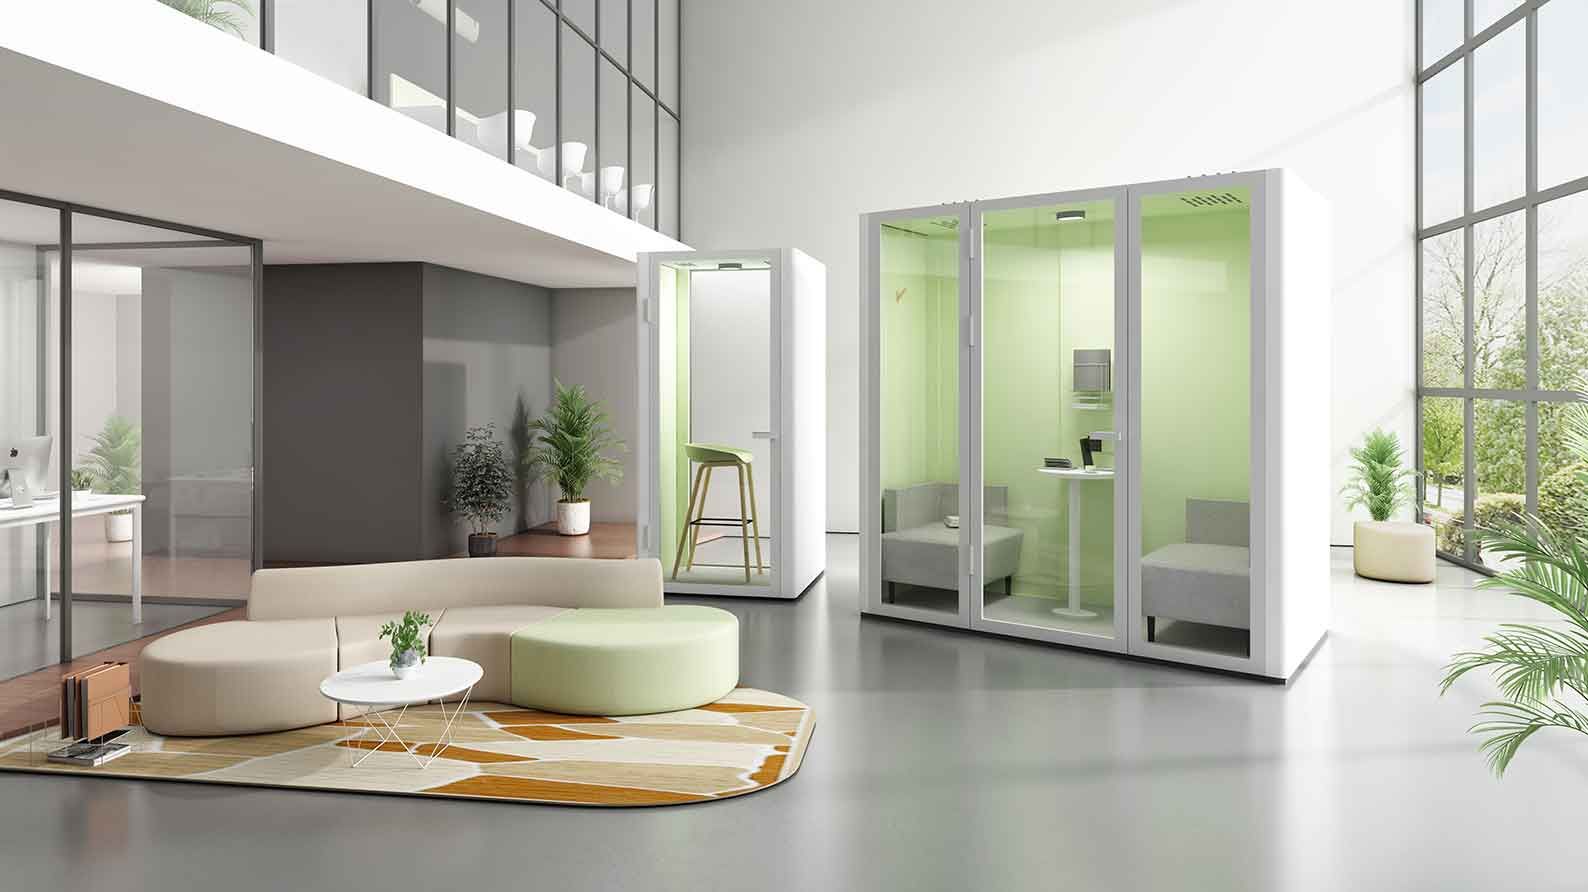 Pods are space efficient, while built-in rooms often result in wasted space